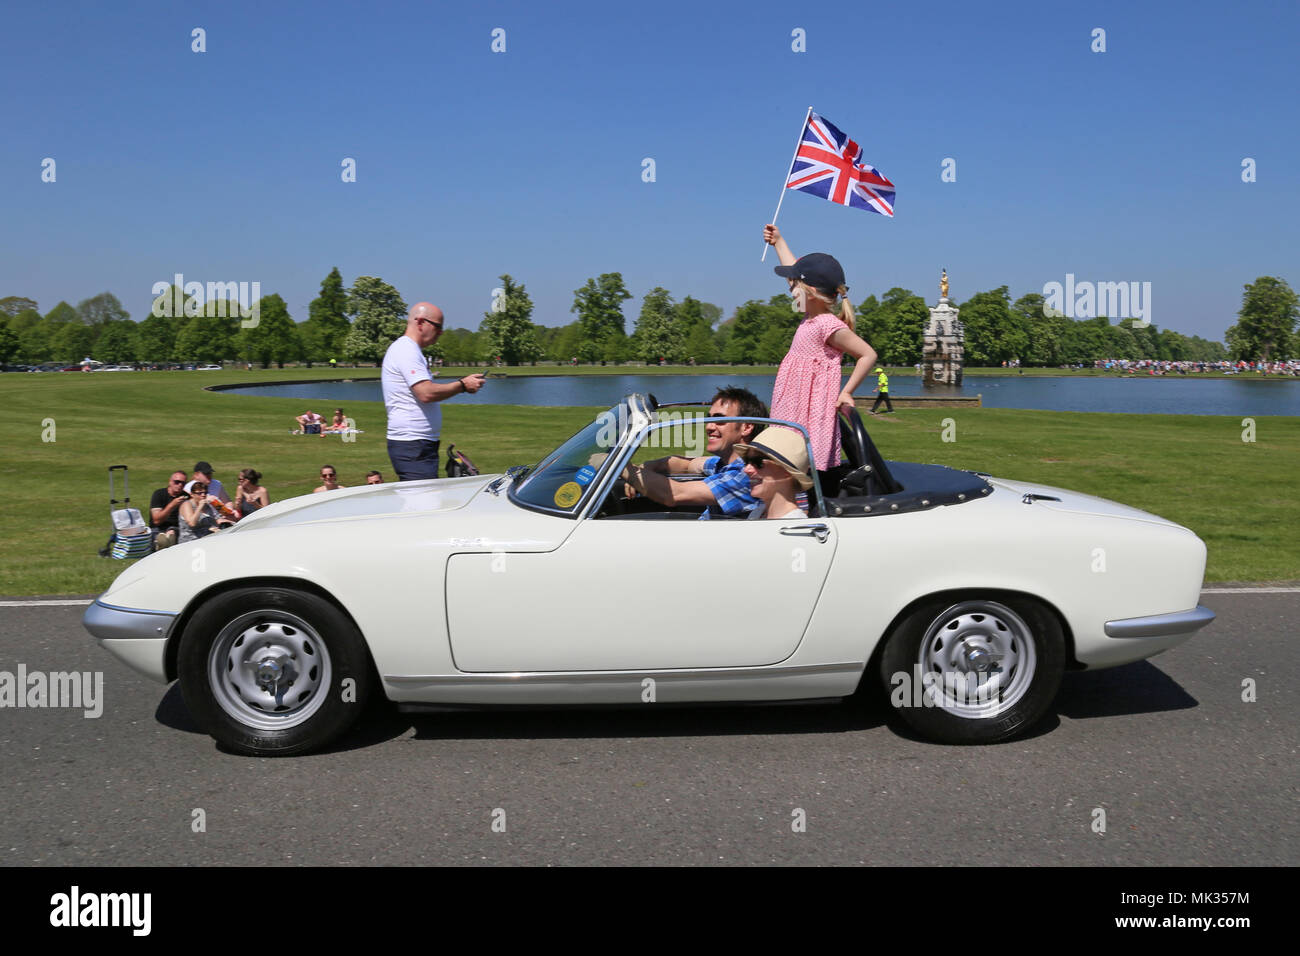 Lotus Elan S3 (1965-1968). Chestnut Sunday, 6th May 2018. Bushy Park, Hampton Court, London Borough of Richmond upon Thames, England, Great Britain, United Kingdom, UK, Europe. Vintage and classic vehicle parade and displays with fairground attractions and military reenactments. Credit: Ian Bottle/Alamy Live News Stock Photo